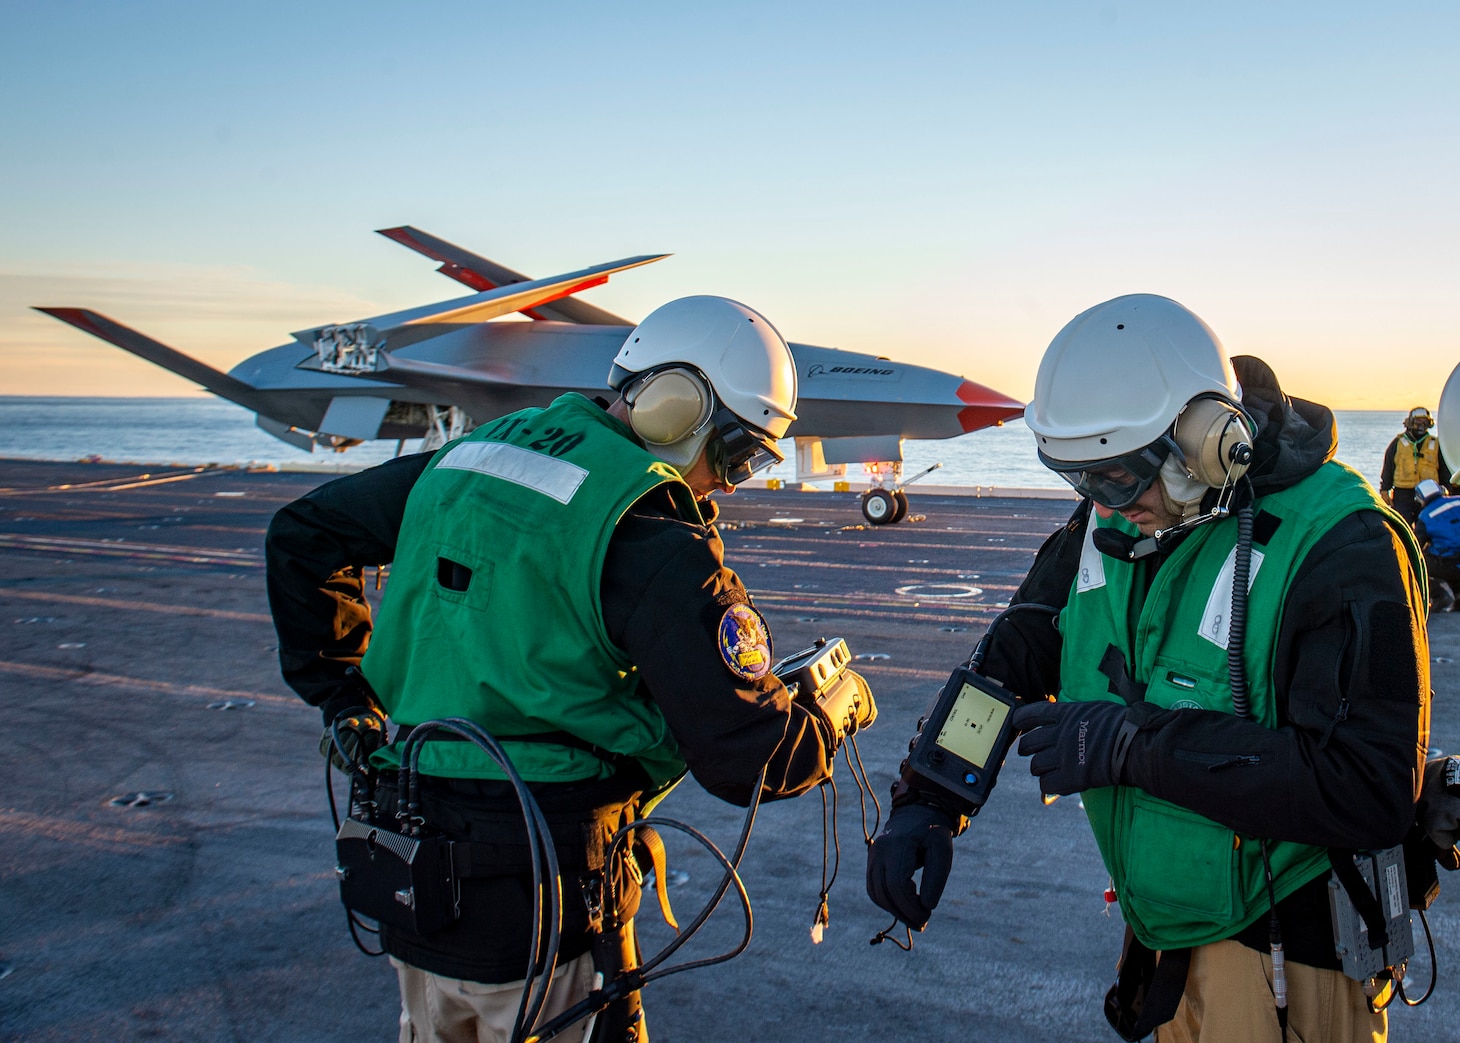 Boeing employees run diagnostics on the Boeing unmanned MQ-25 aircraft on the flight deck aboard the aircraft carrier USS George H.W. Bush (CVN 77).